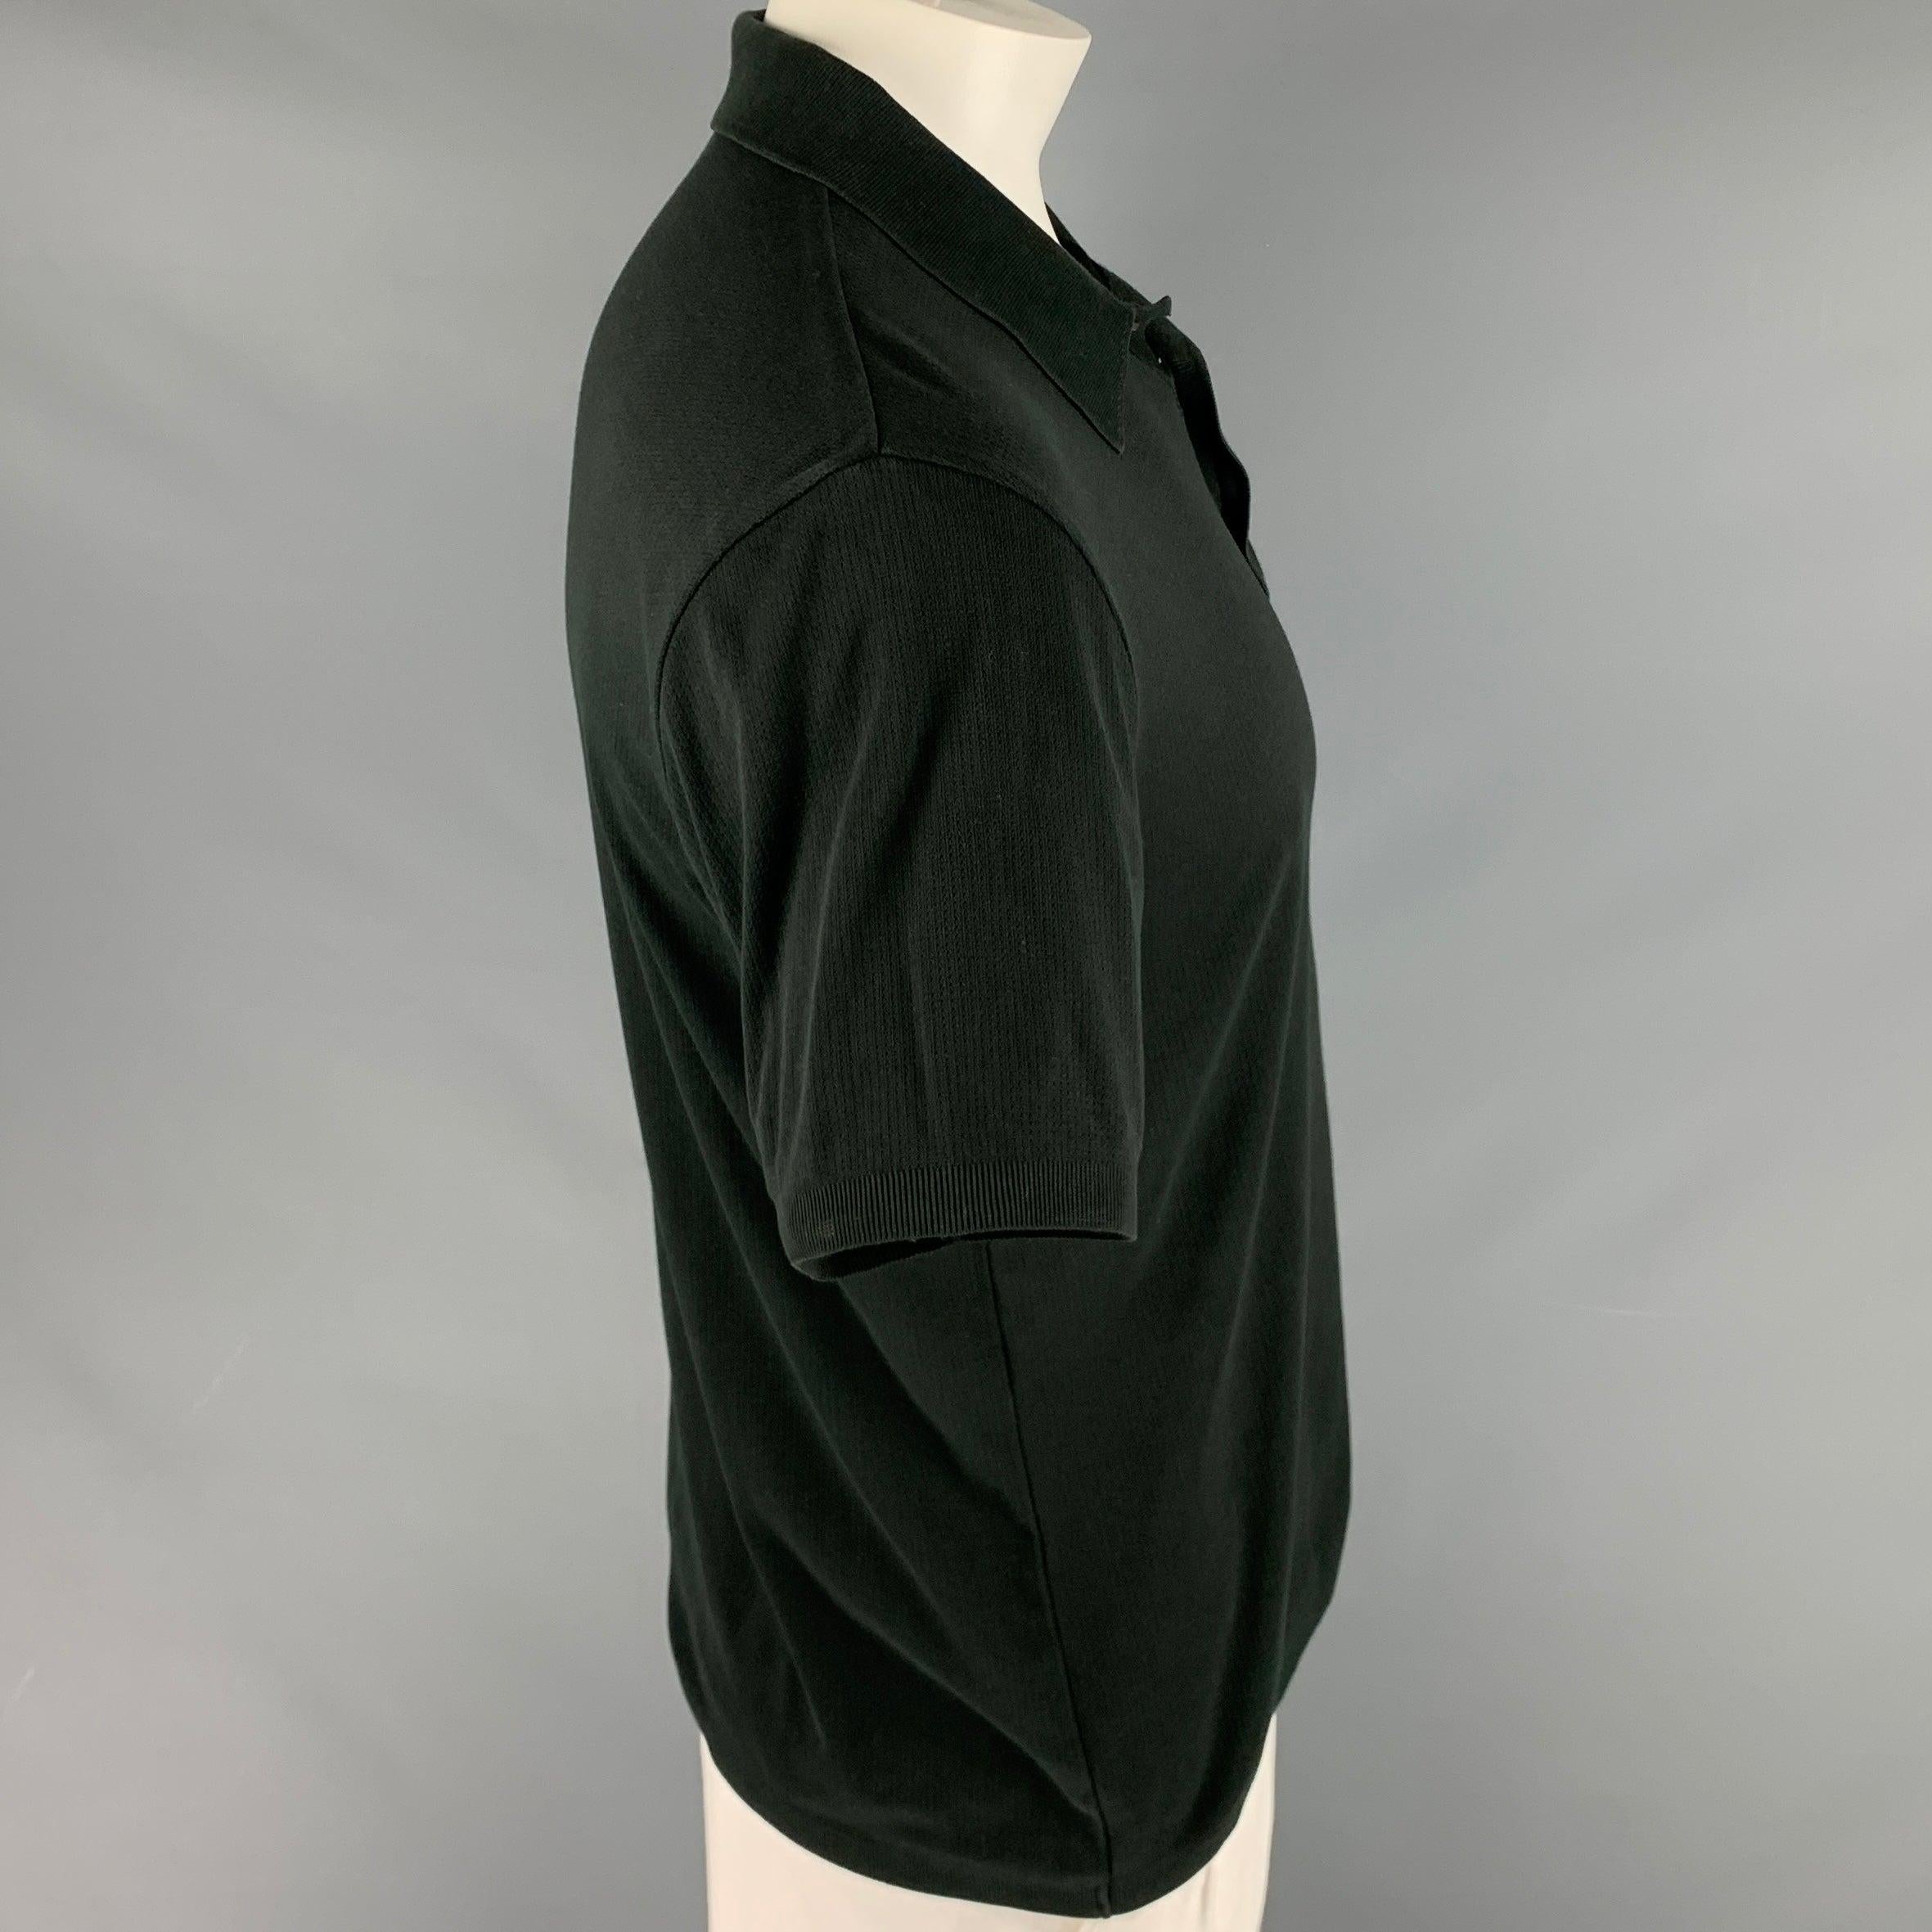 BOSS by HUGO BOSS polo
in a
black cotton blend featuring a breathable knit style, spread collar, and half placket button closure.Excellent Pre-Owned Condition. 

Marked:   L 

Measurements: 
 
Shoulder: 18.5 inches Chest: 44 inches Sleeve: 9 inches